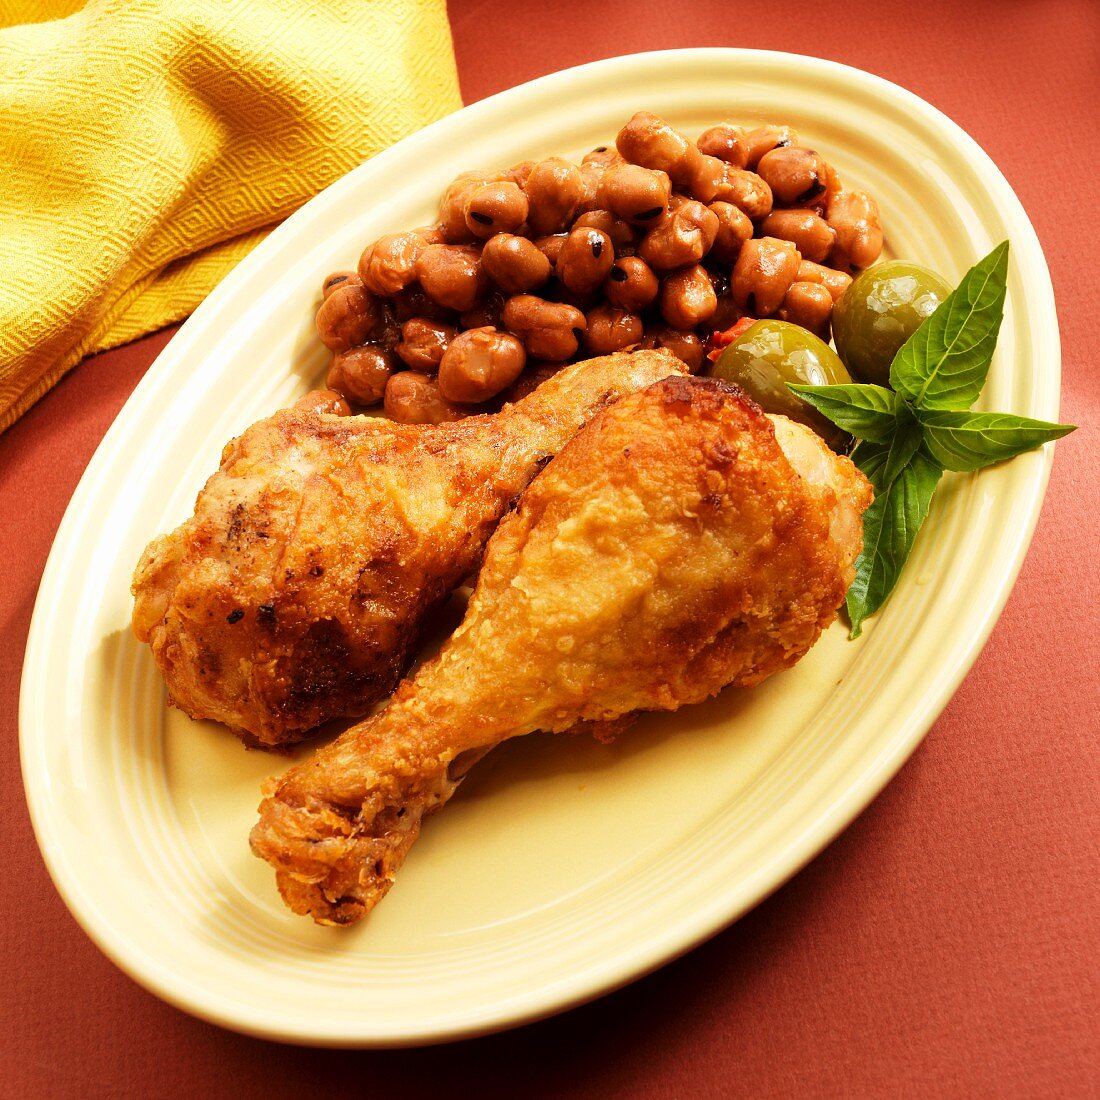 Crispy chicken drumsticks with fava beans and olives (Spain)